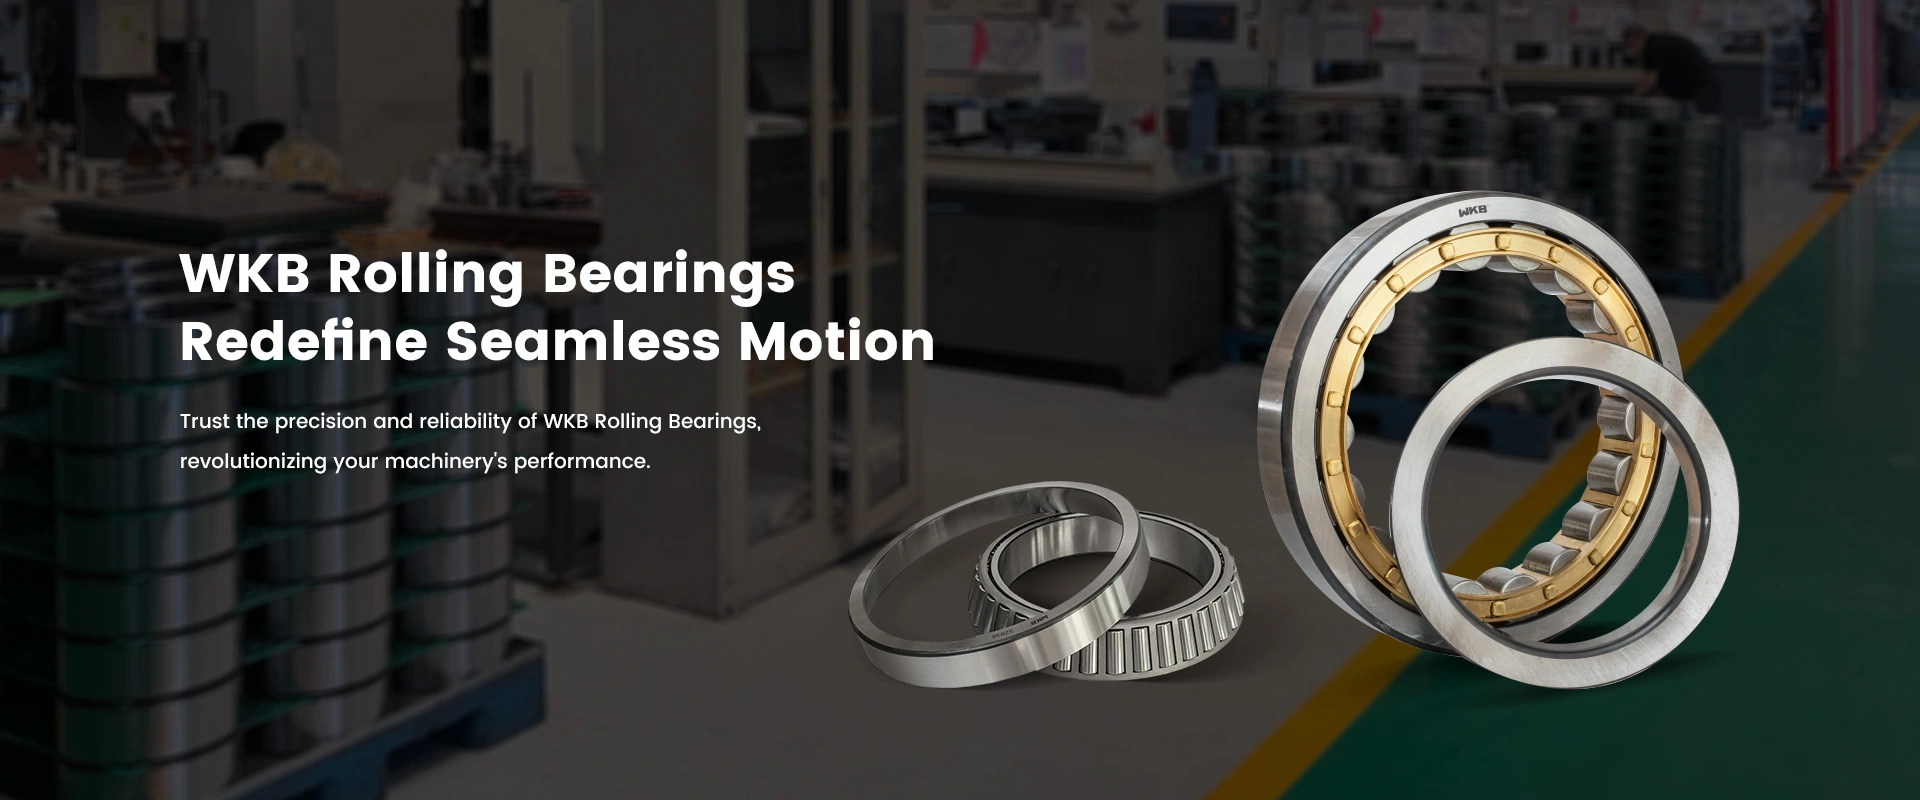 Trust the precision and reliability of WKB Rolling Bearings, revolutionizing your machinery's performance.